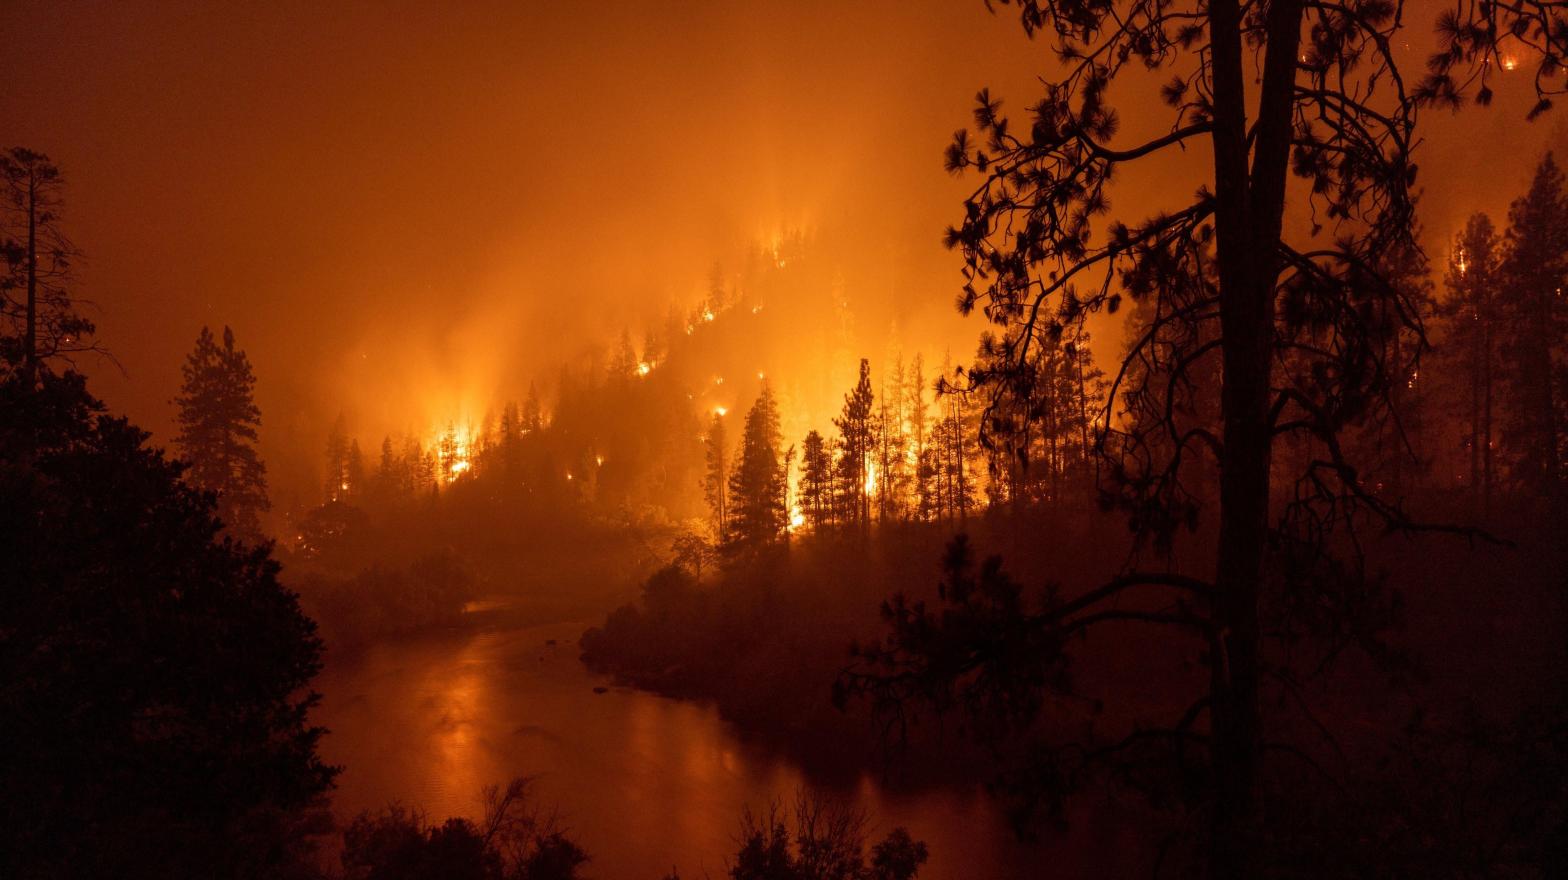 The McKinney Fire has burned over 52,000 acres of northern California.  (Image: David McNew, Getty Images)